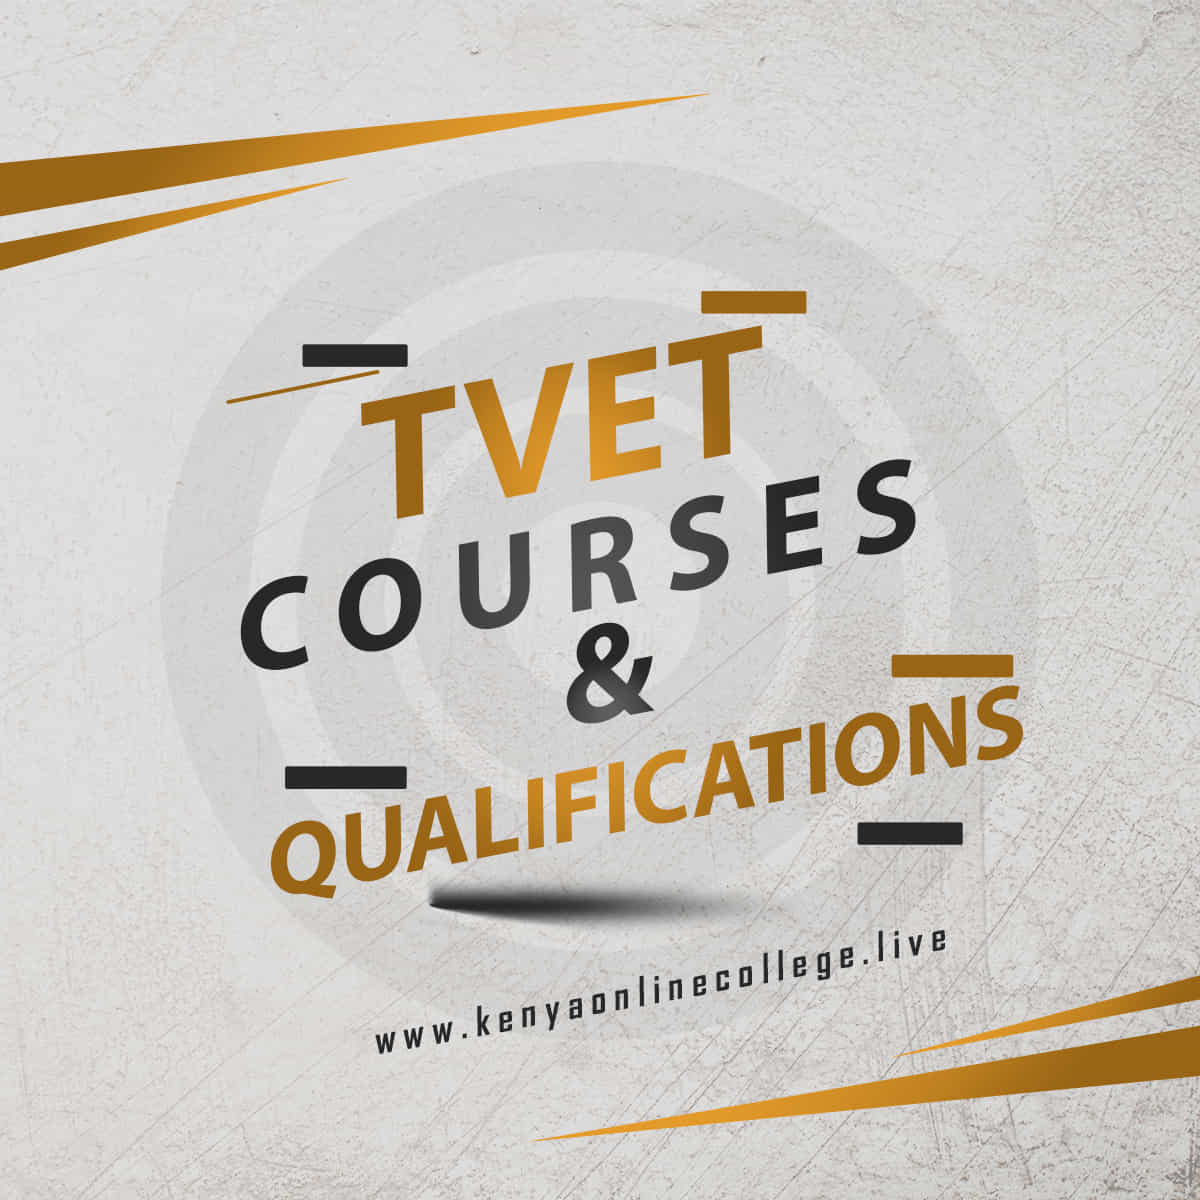 TVET courses and qualifications